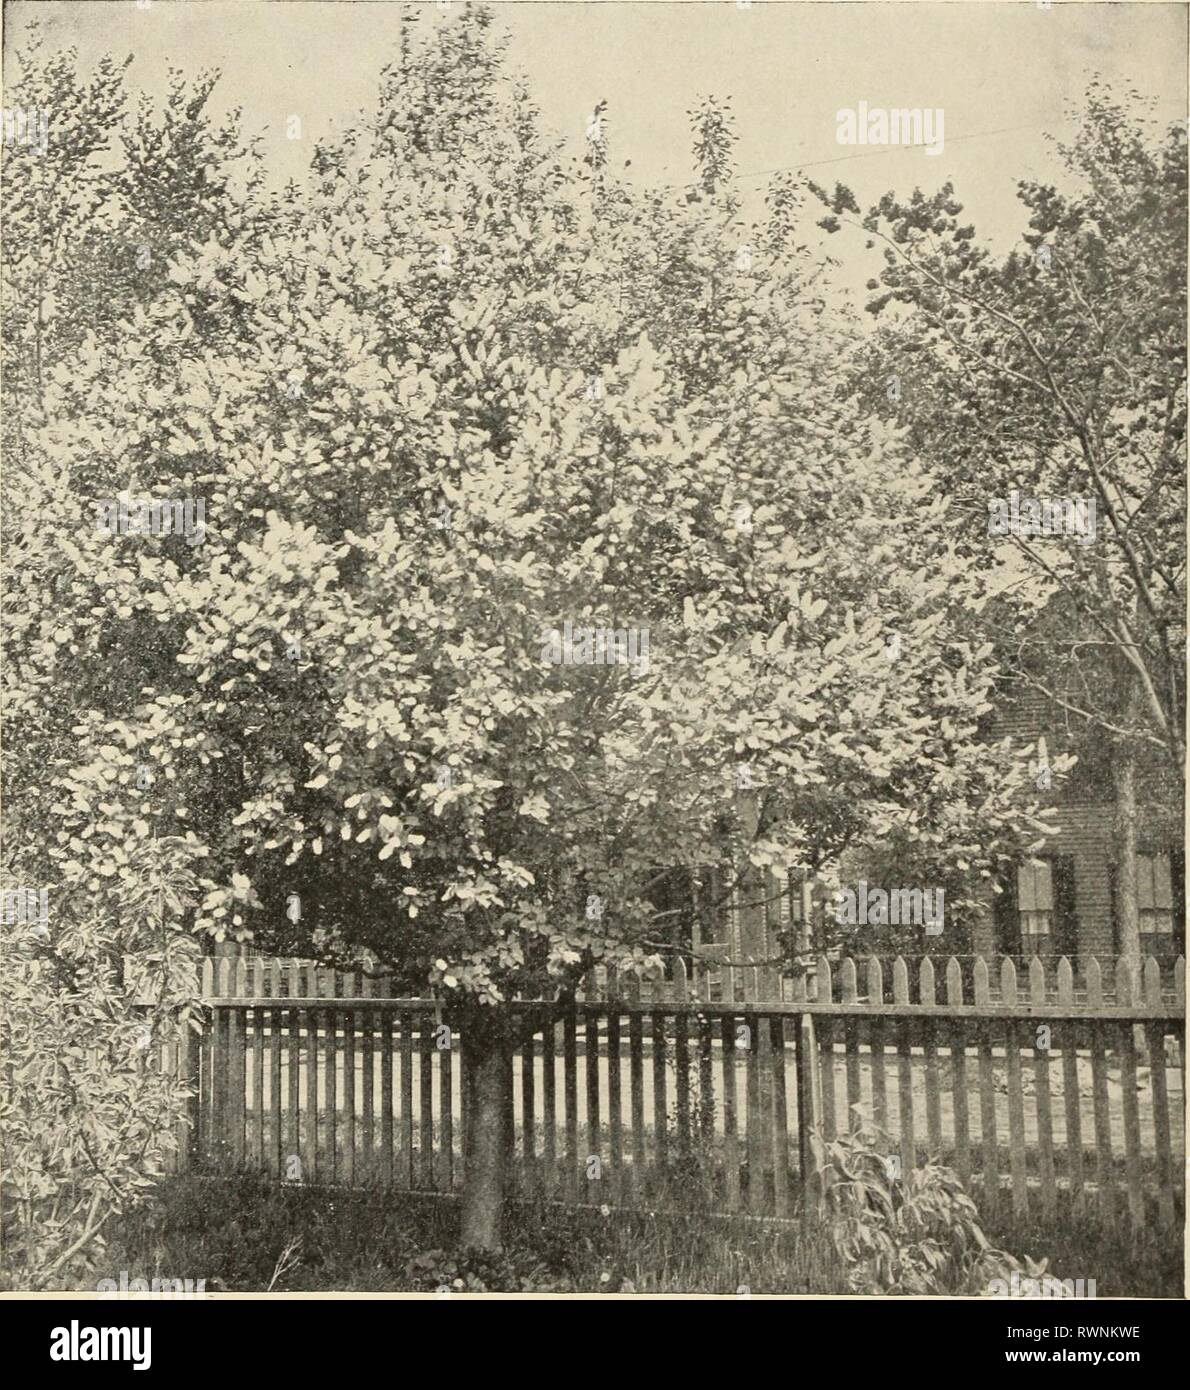 Ellwanger & Barry  Mount Ellwanger & Barry : Mount Hope nurseries ellwangerbarrymo1899moun Year: 1899  56 ELLWANGER &- BARRY'S Populus grandidentata pendula. Weeping Tooth-leaved Poplar. C. A variety of rapid growth, with long, slender branches, drooping gracefully to the ground; foliage large and deeply serrated. A fine weeper, ^i.oo. P. Nolestii. B. Asiatic species. A strong grower, rather spreading; leaves medium to large, cordate and dark green. 50c. P. Parasol de St. Julian. C. A variety from France, of fine drooping habit. $1.00. P. pyramidalis suaveolens. B. A compact pyramidal grower,  Stock Photo